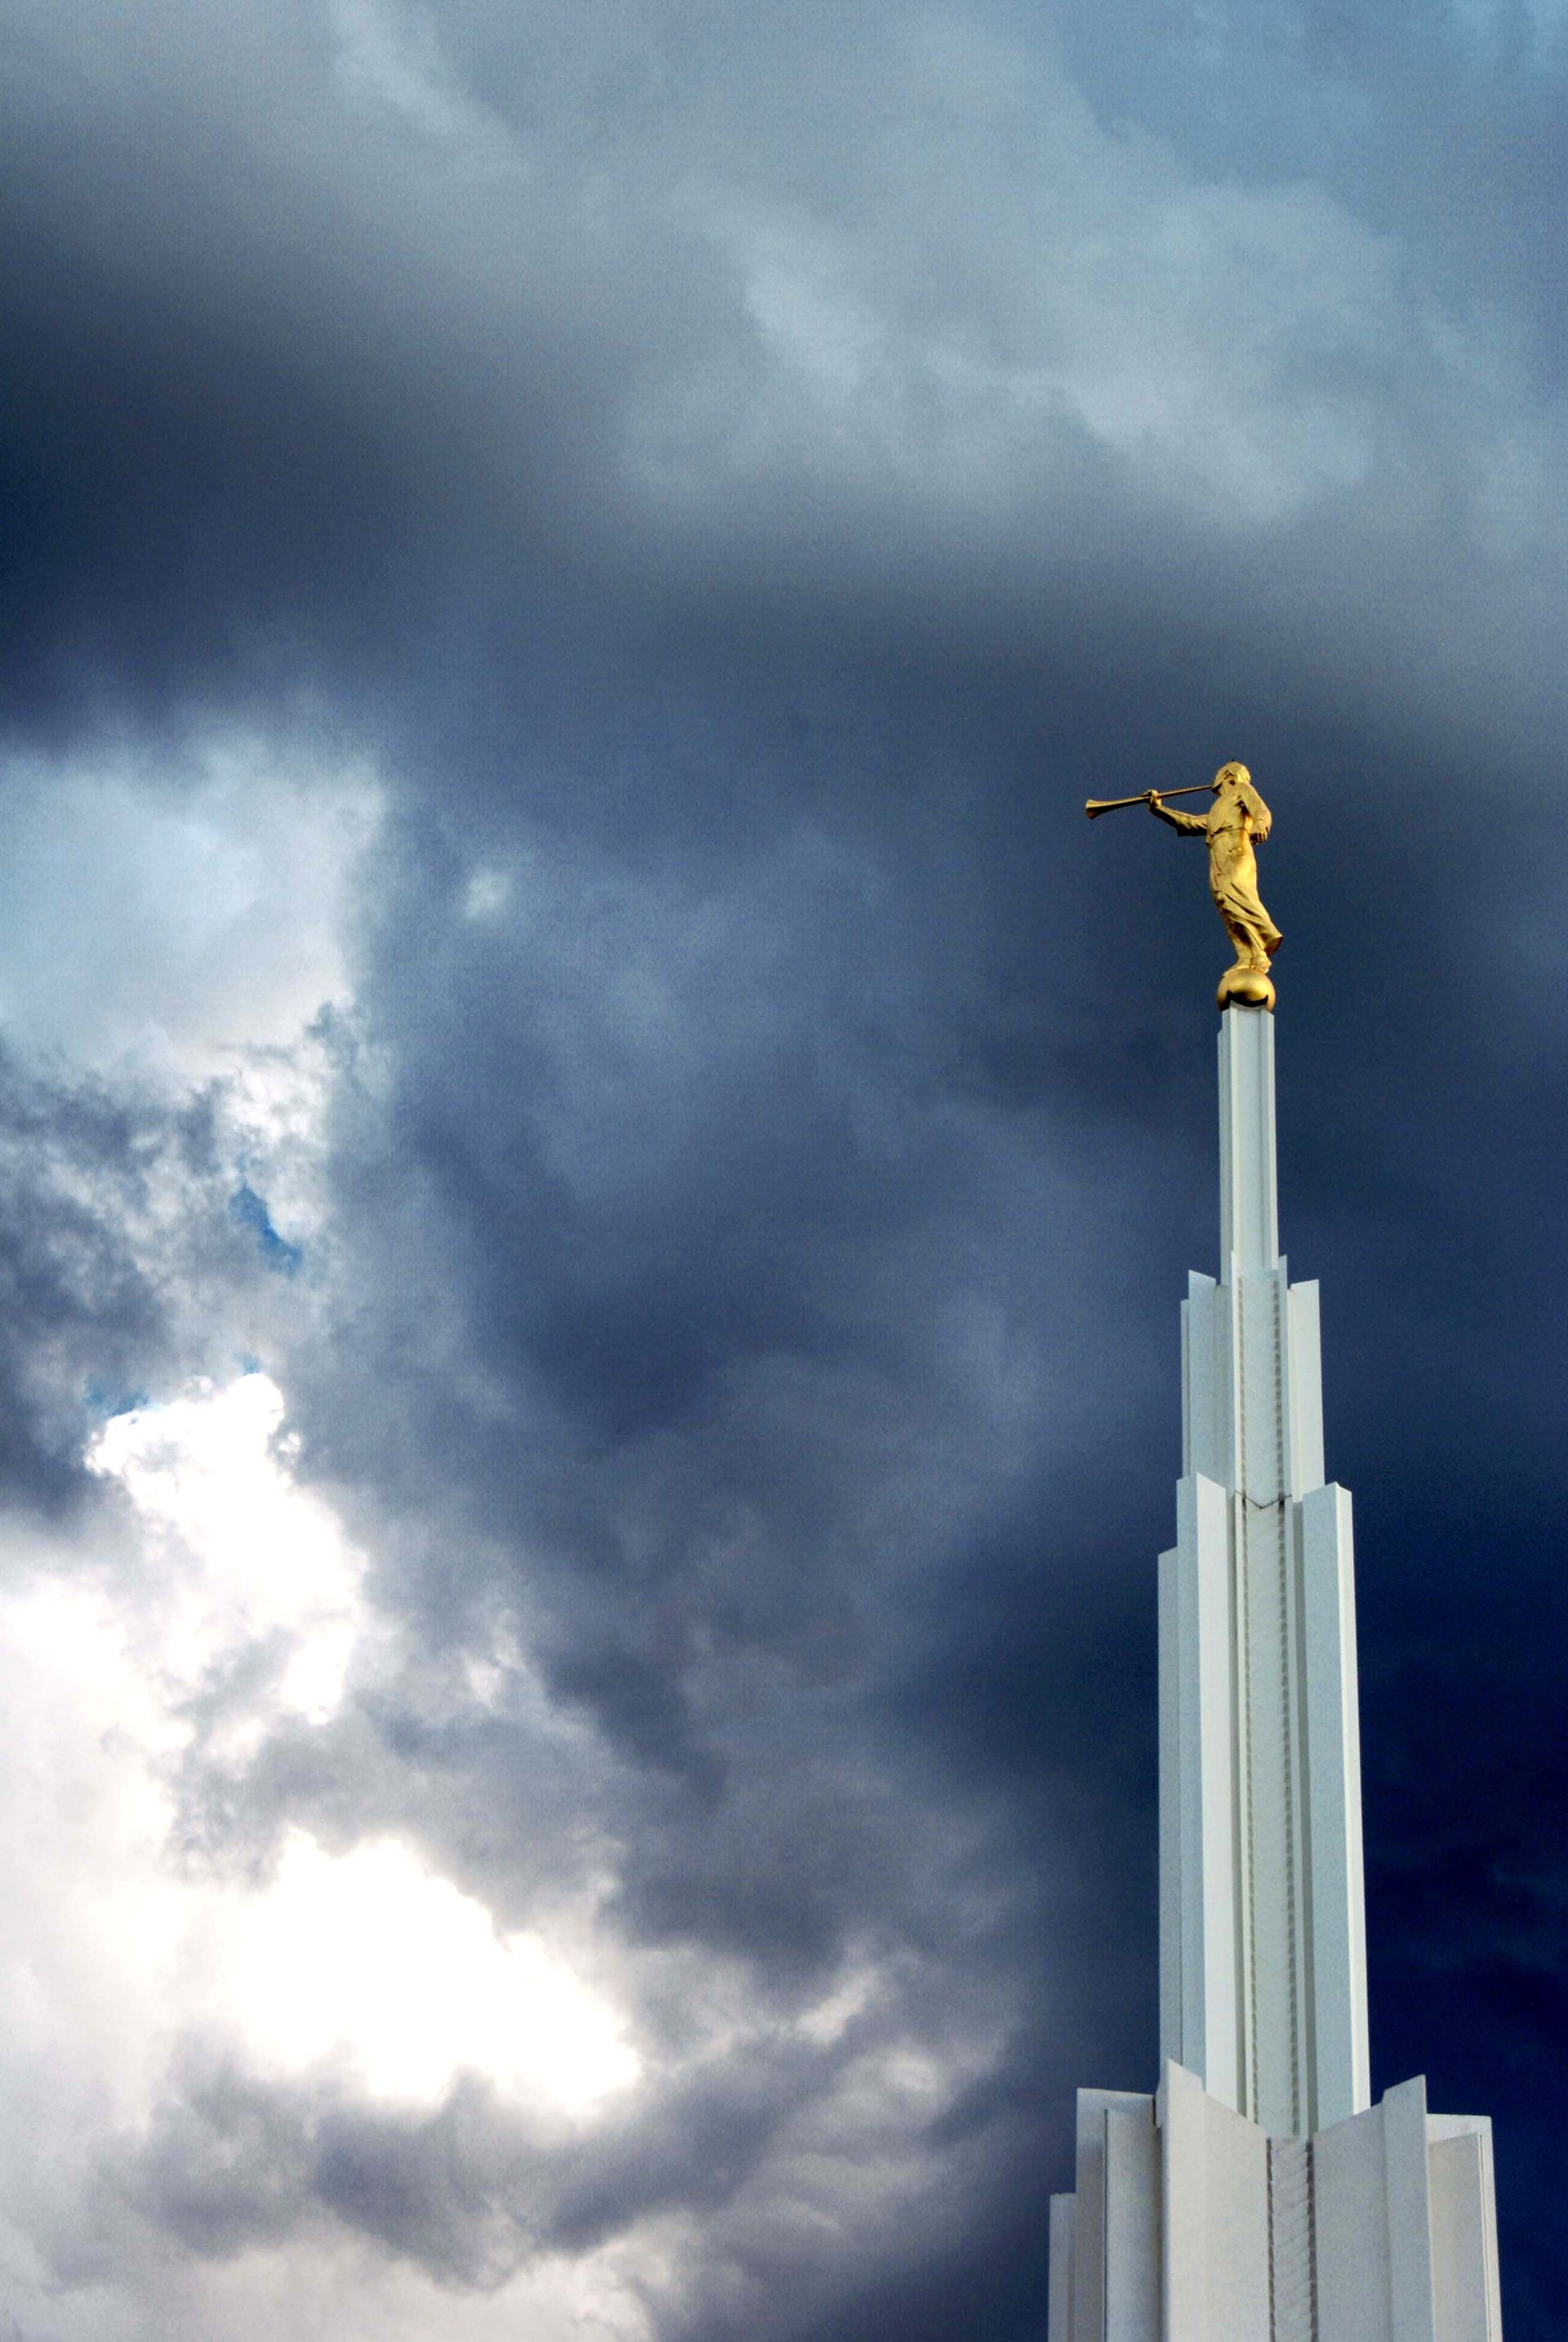 The angel Moroni stands on top of the spire of the Denver Colorado Temple.